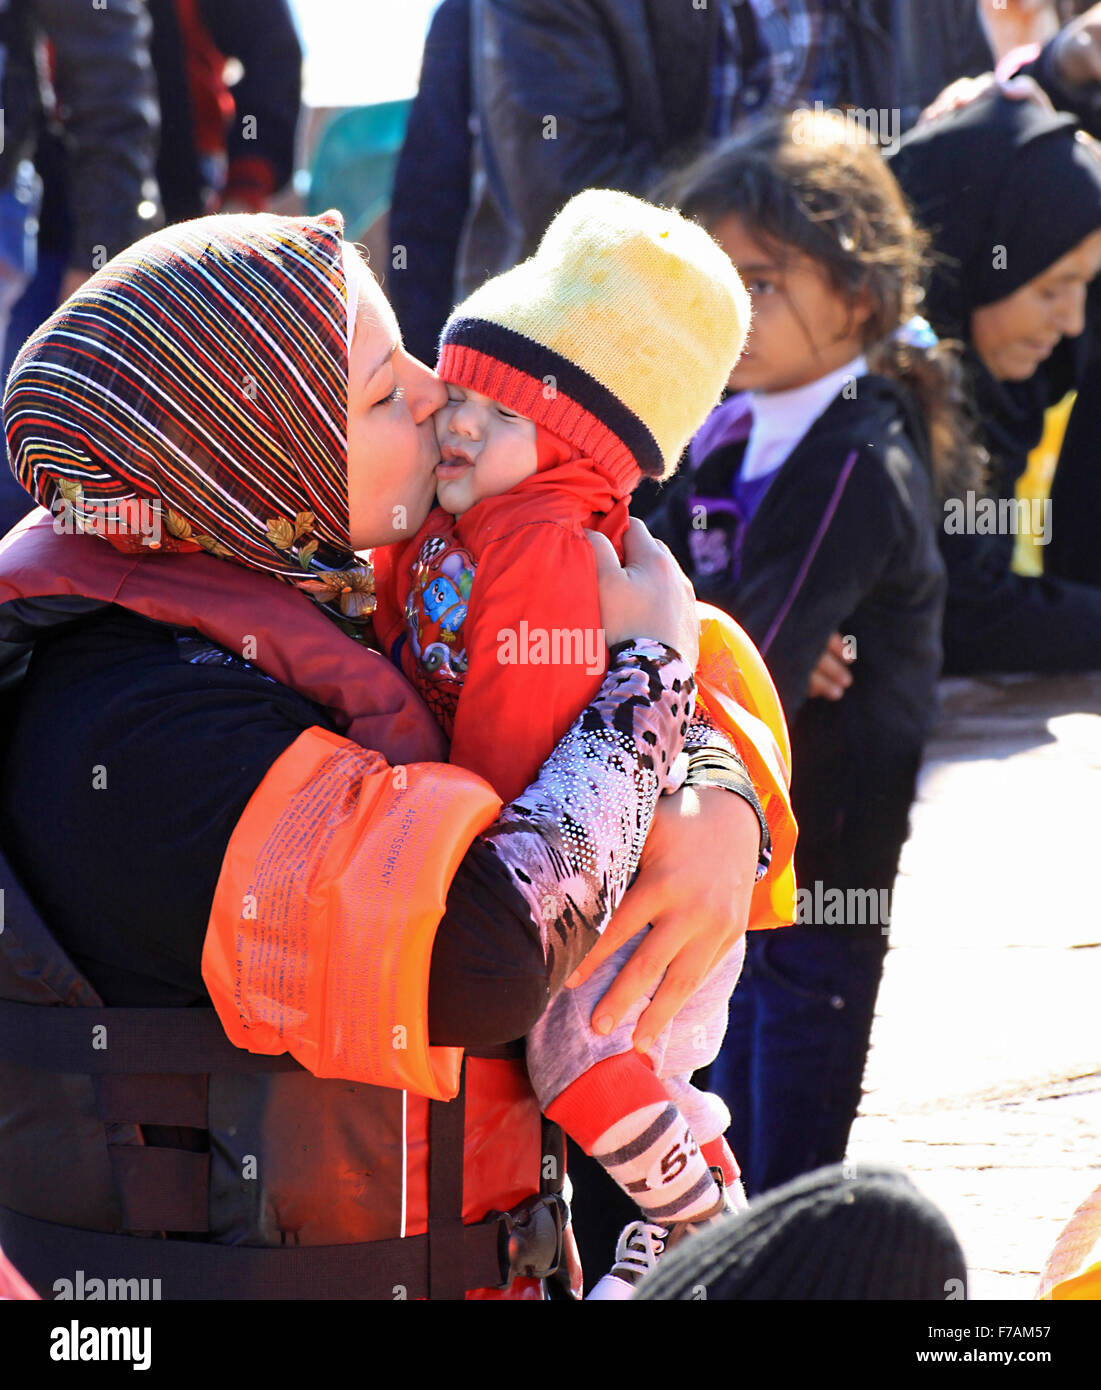 Syrian refugees and immigrant family's arrive  in Molyvos on the island of Lesbos Greece after fleeing war torn Syria by inflatable boat Stock Photo